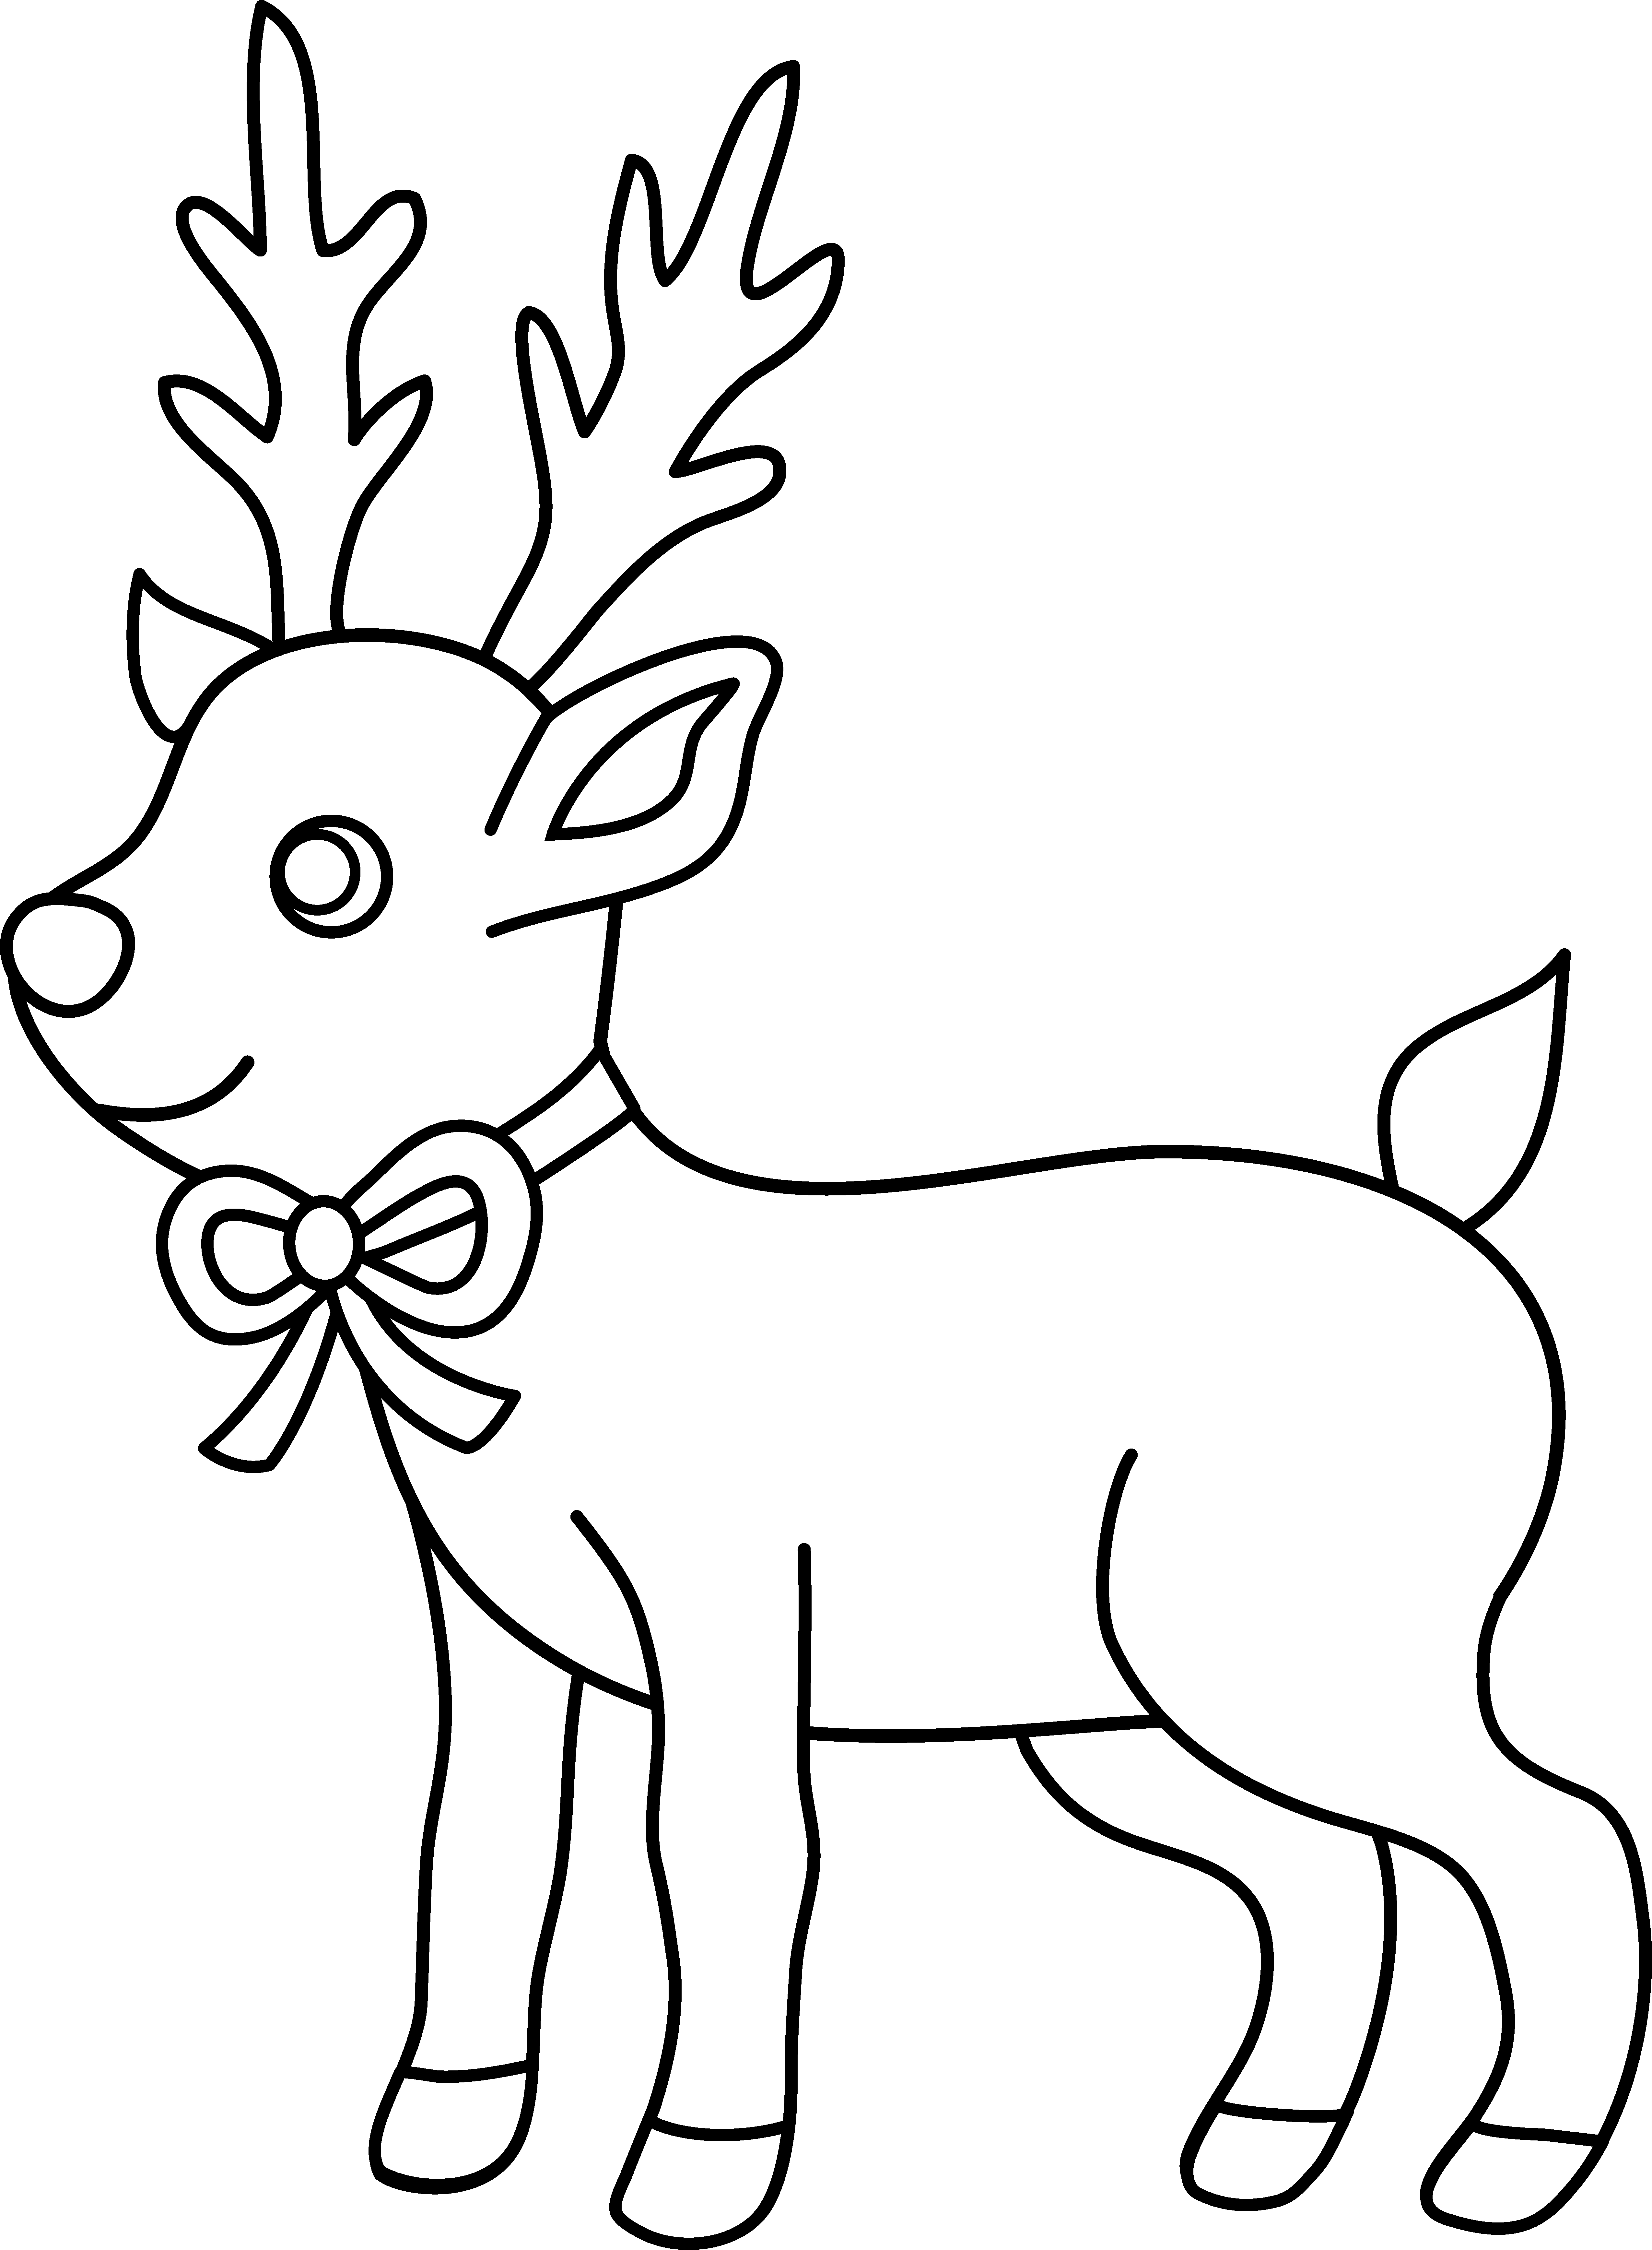 download-christmas-reindeer-coloring-page-christmas-coloring-pages-to